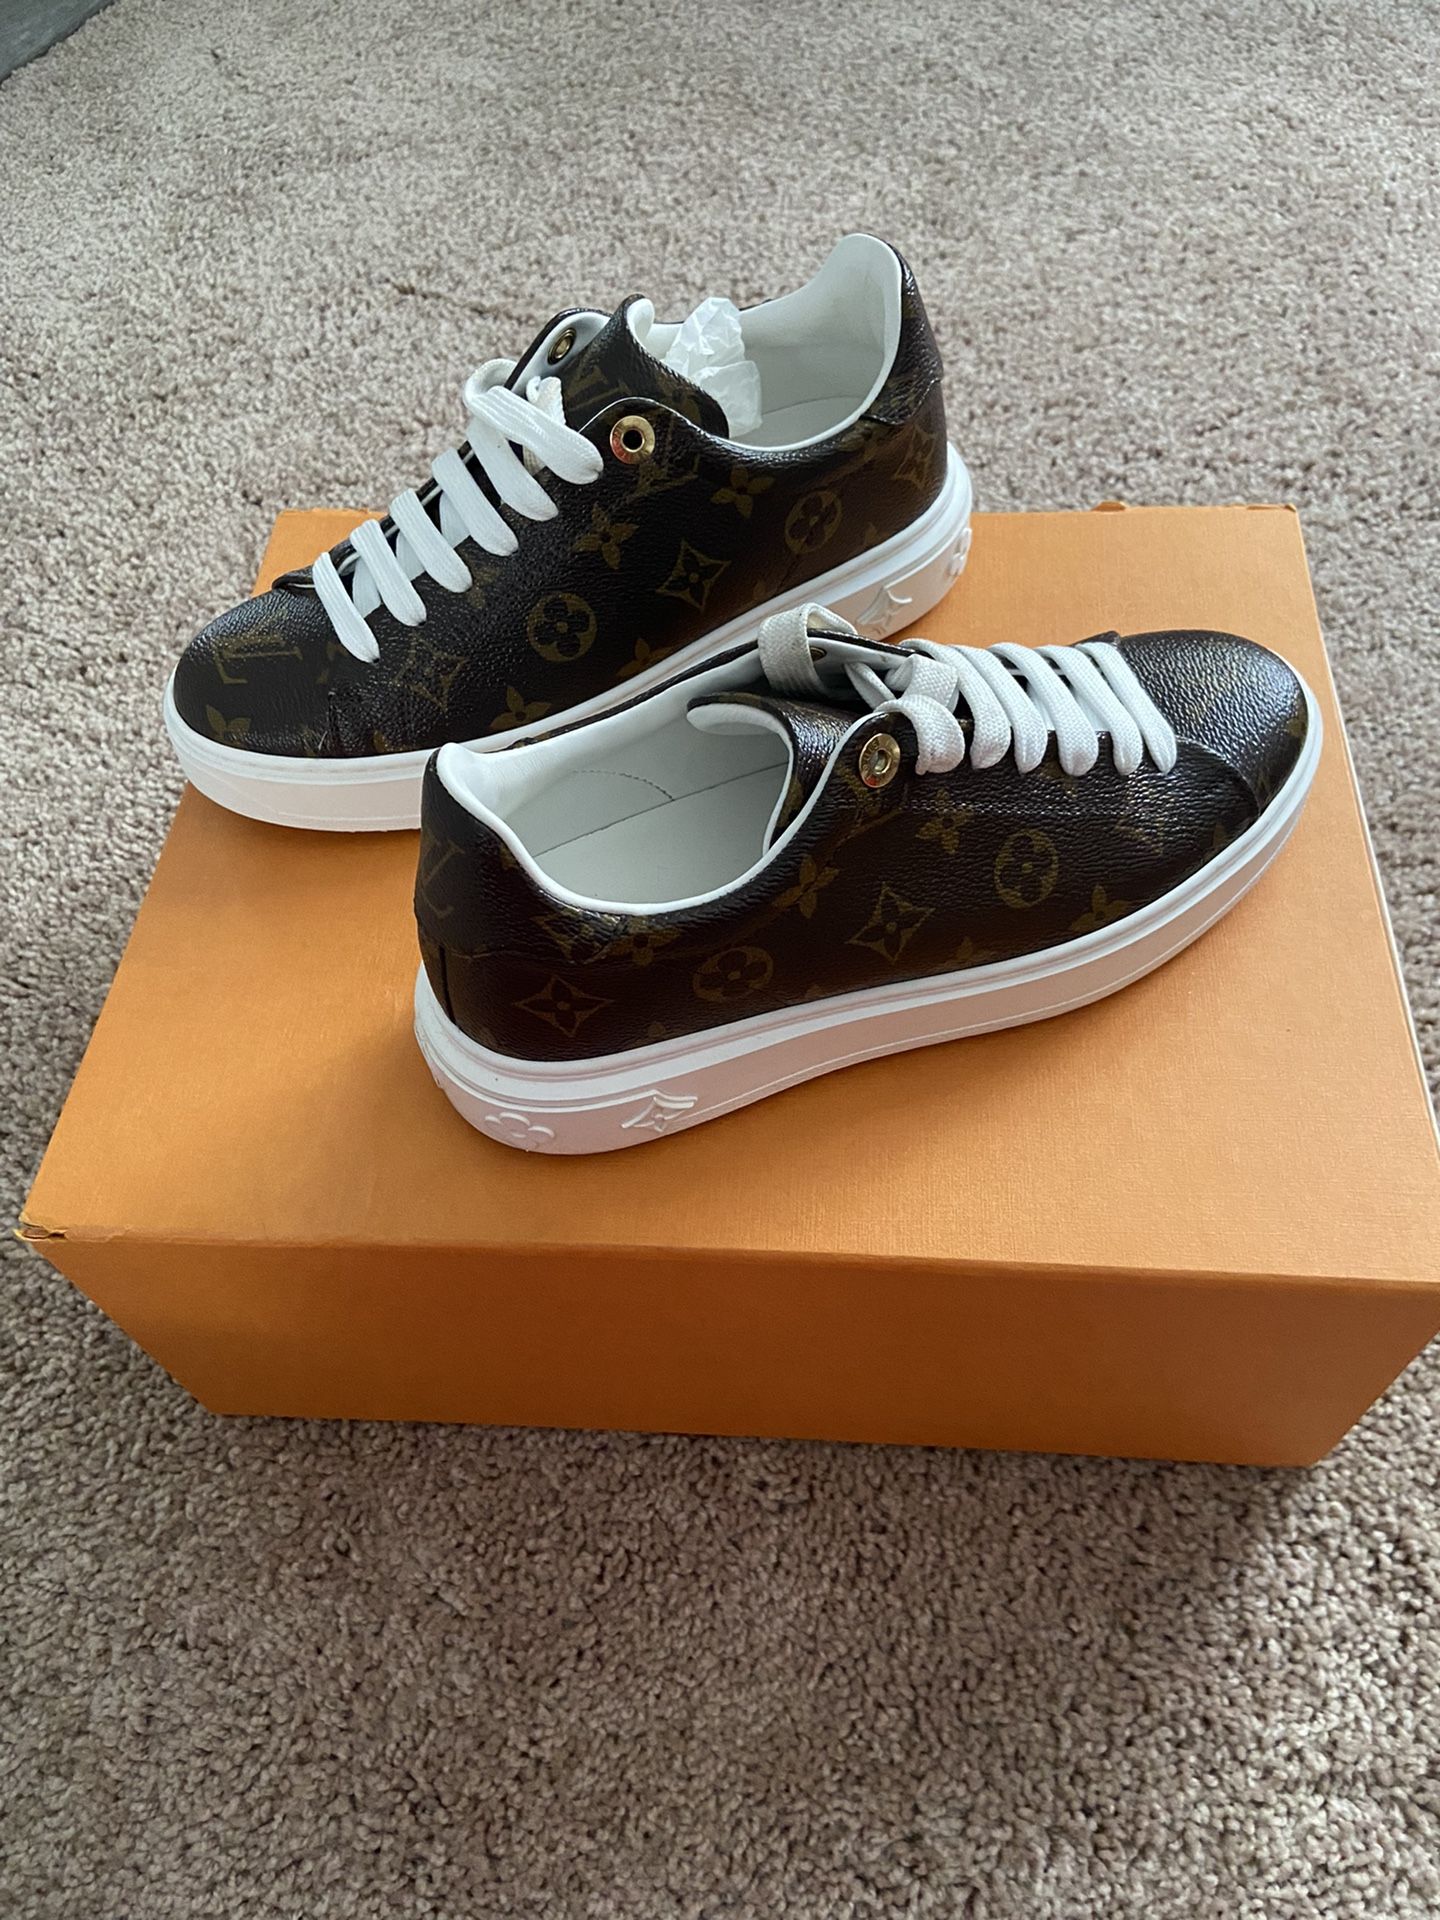 AUTHENTIC LOUIS VUITTON Sneakers SIZE 6 $900 obo